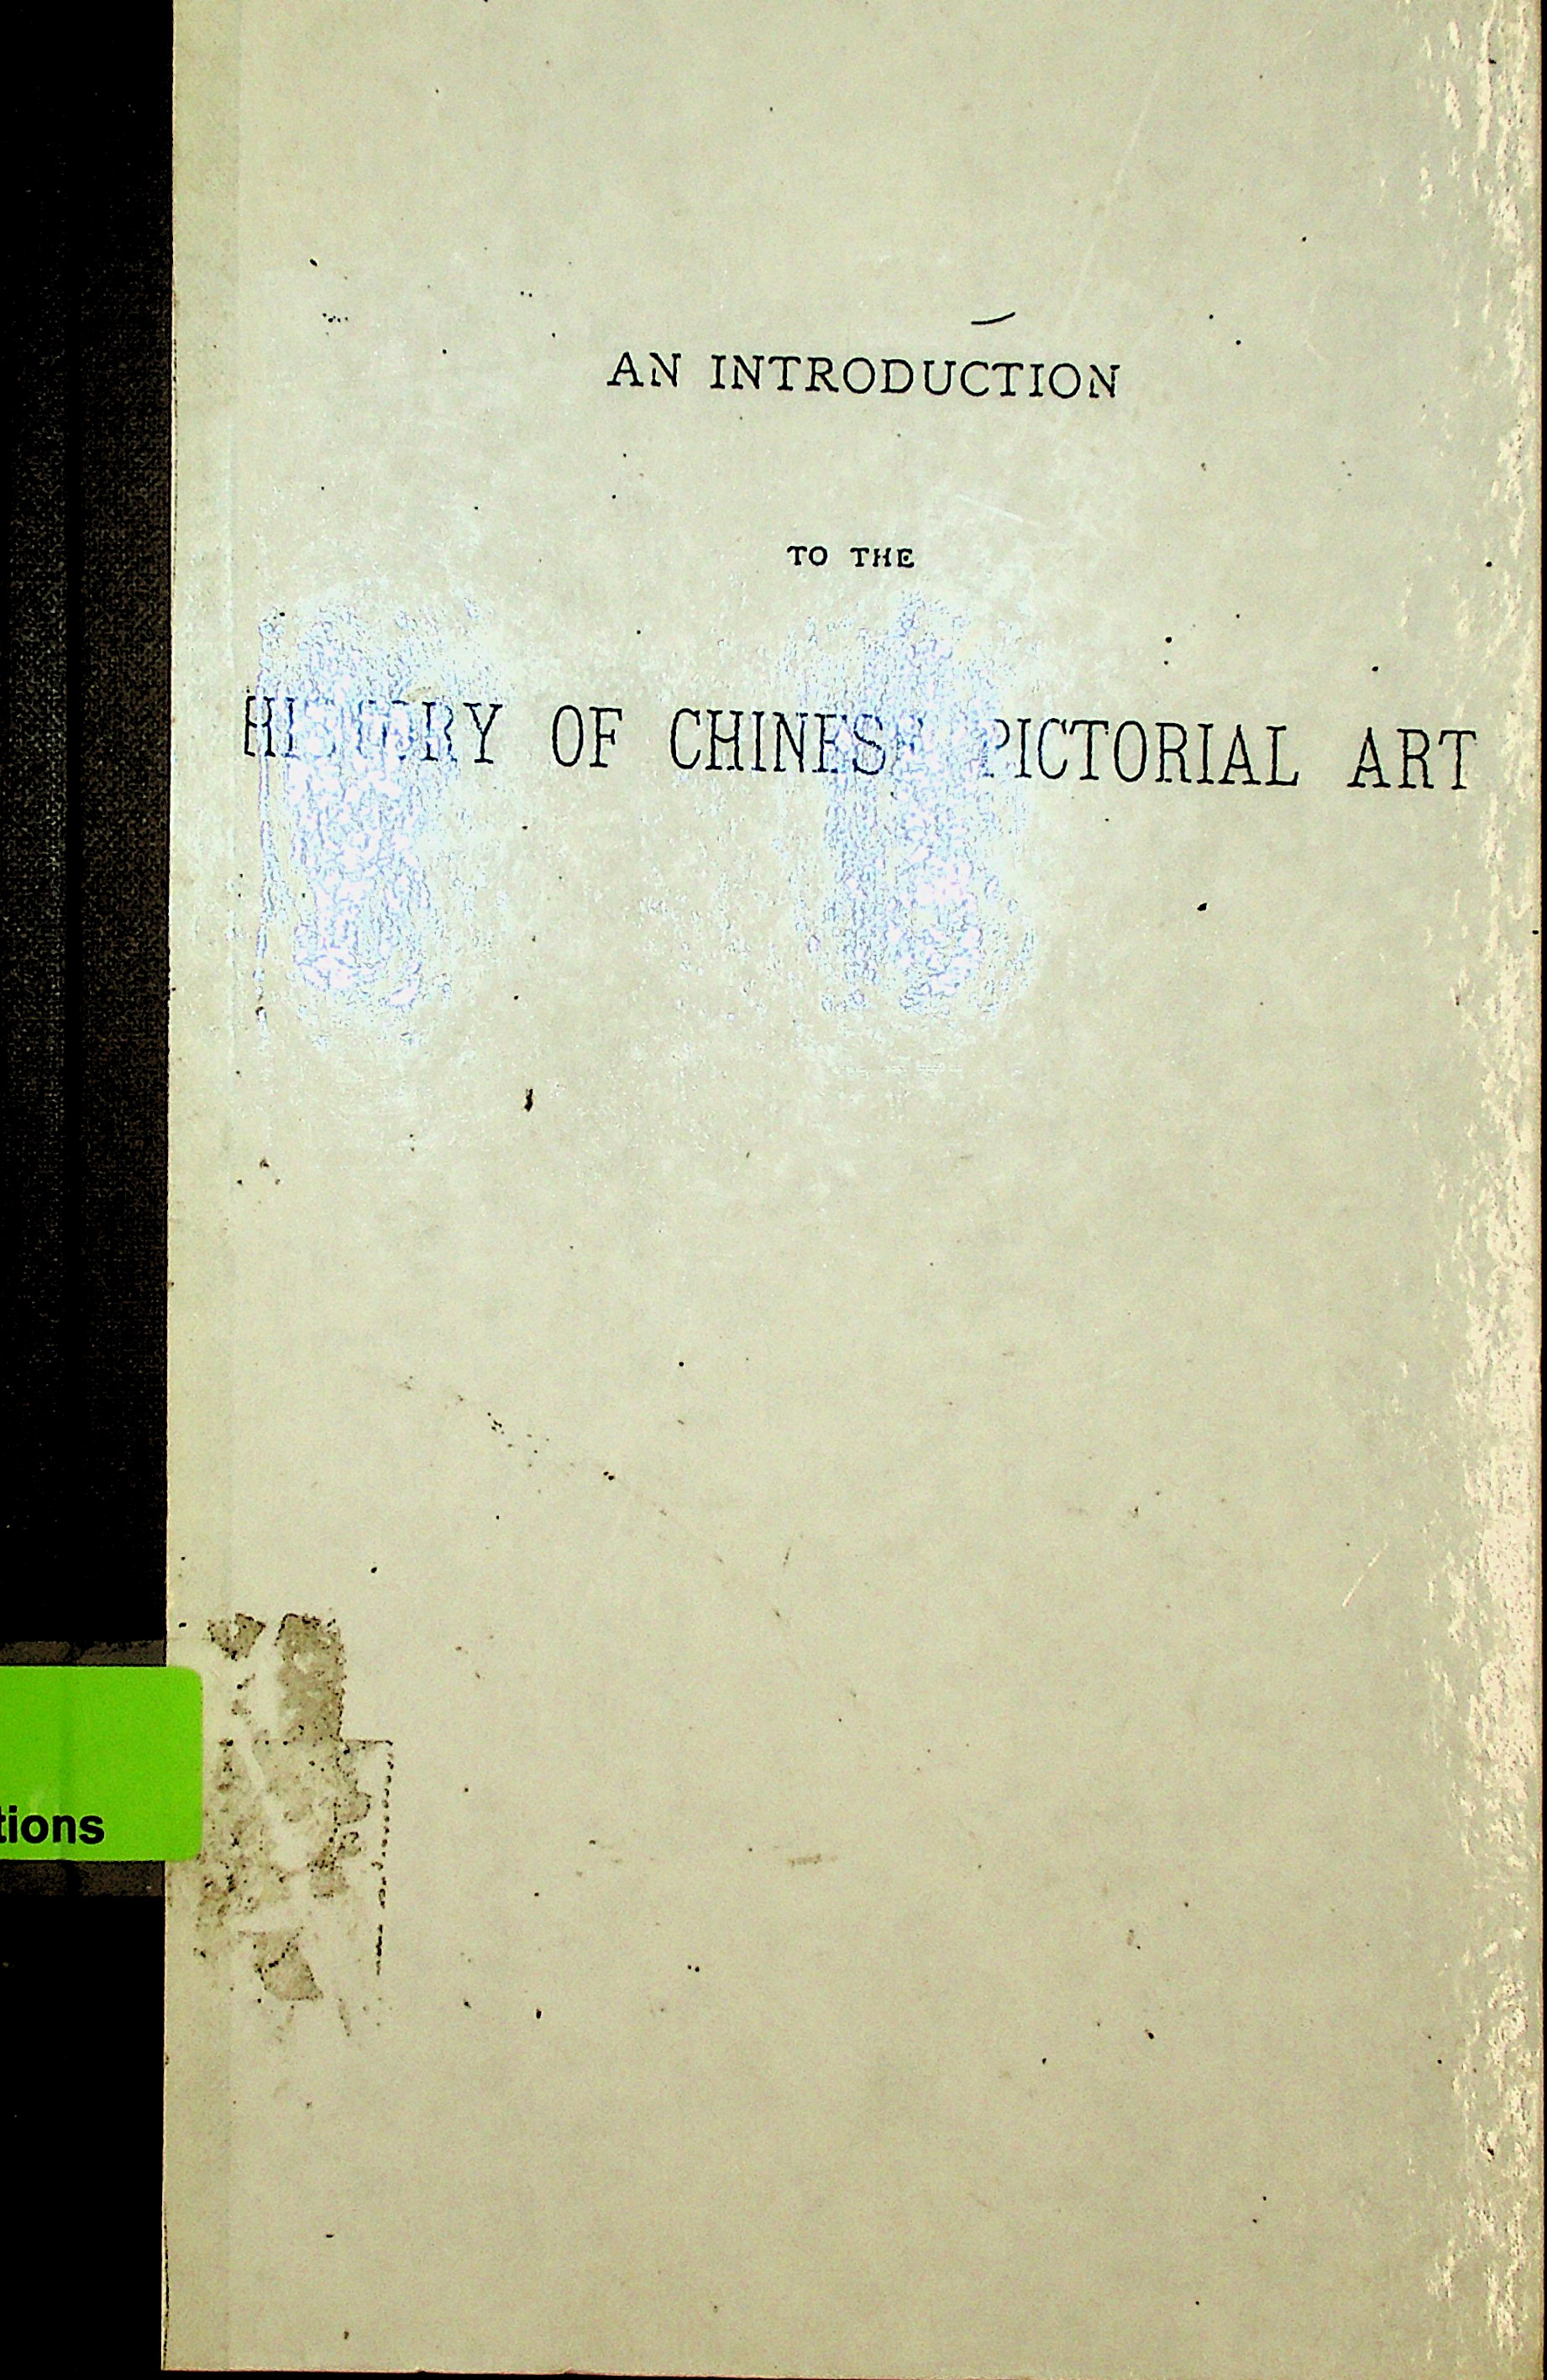 An introduction to the history of Chinese pictorial art 